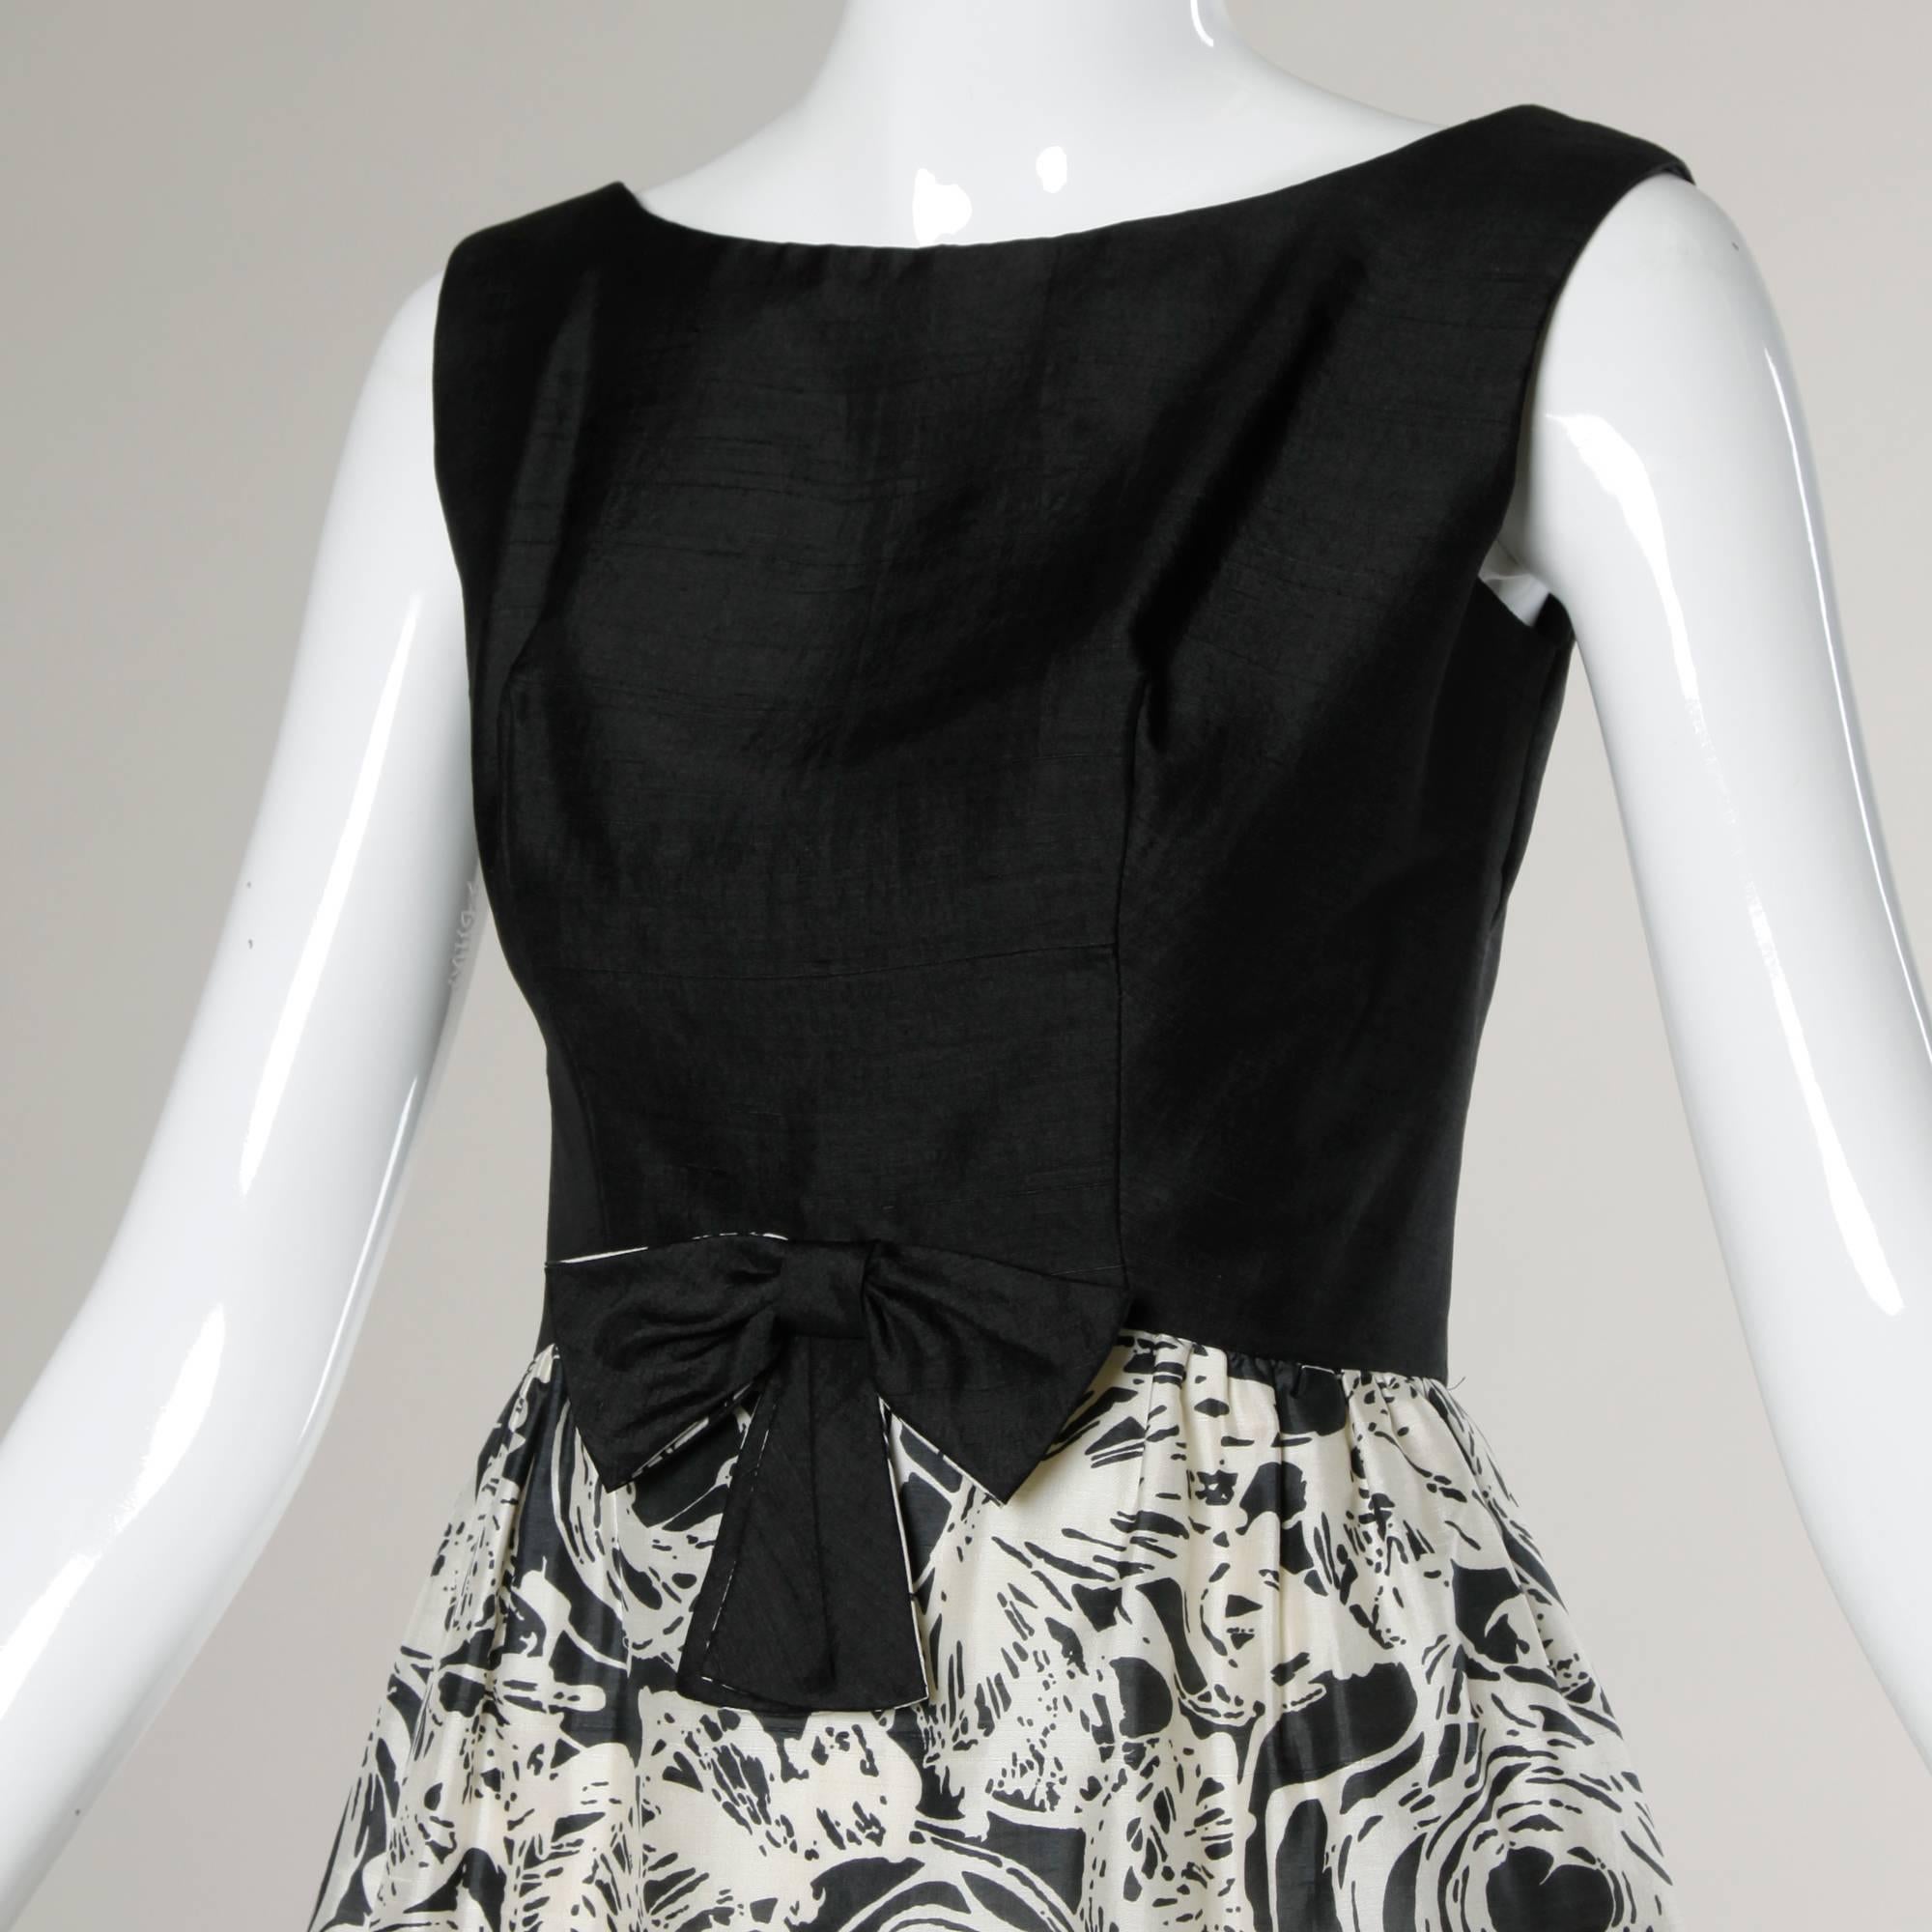 Pretty vintage cocktail dress from the 1960s. Graphic print black and white silk fabric and front bow embellishment.

Details:

Fully Lined
Back Metal Zip and Hook Closure 
Marked Size: Not Marked
Estimated Size: Small
Color: Black/